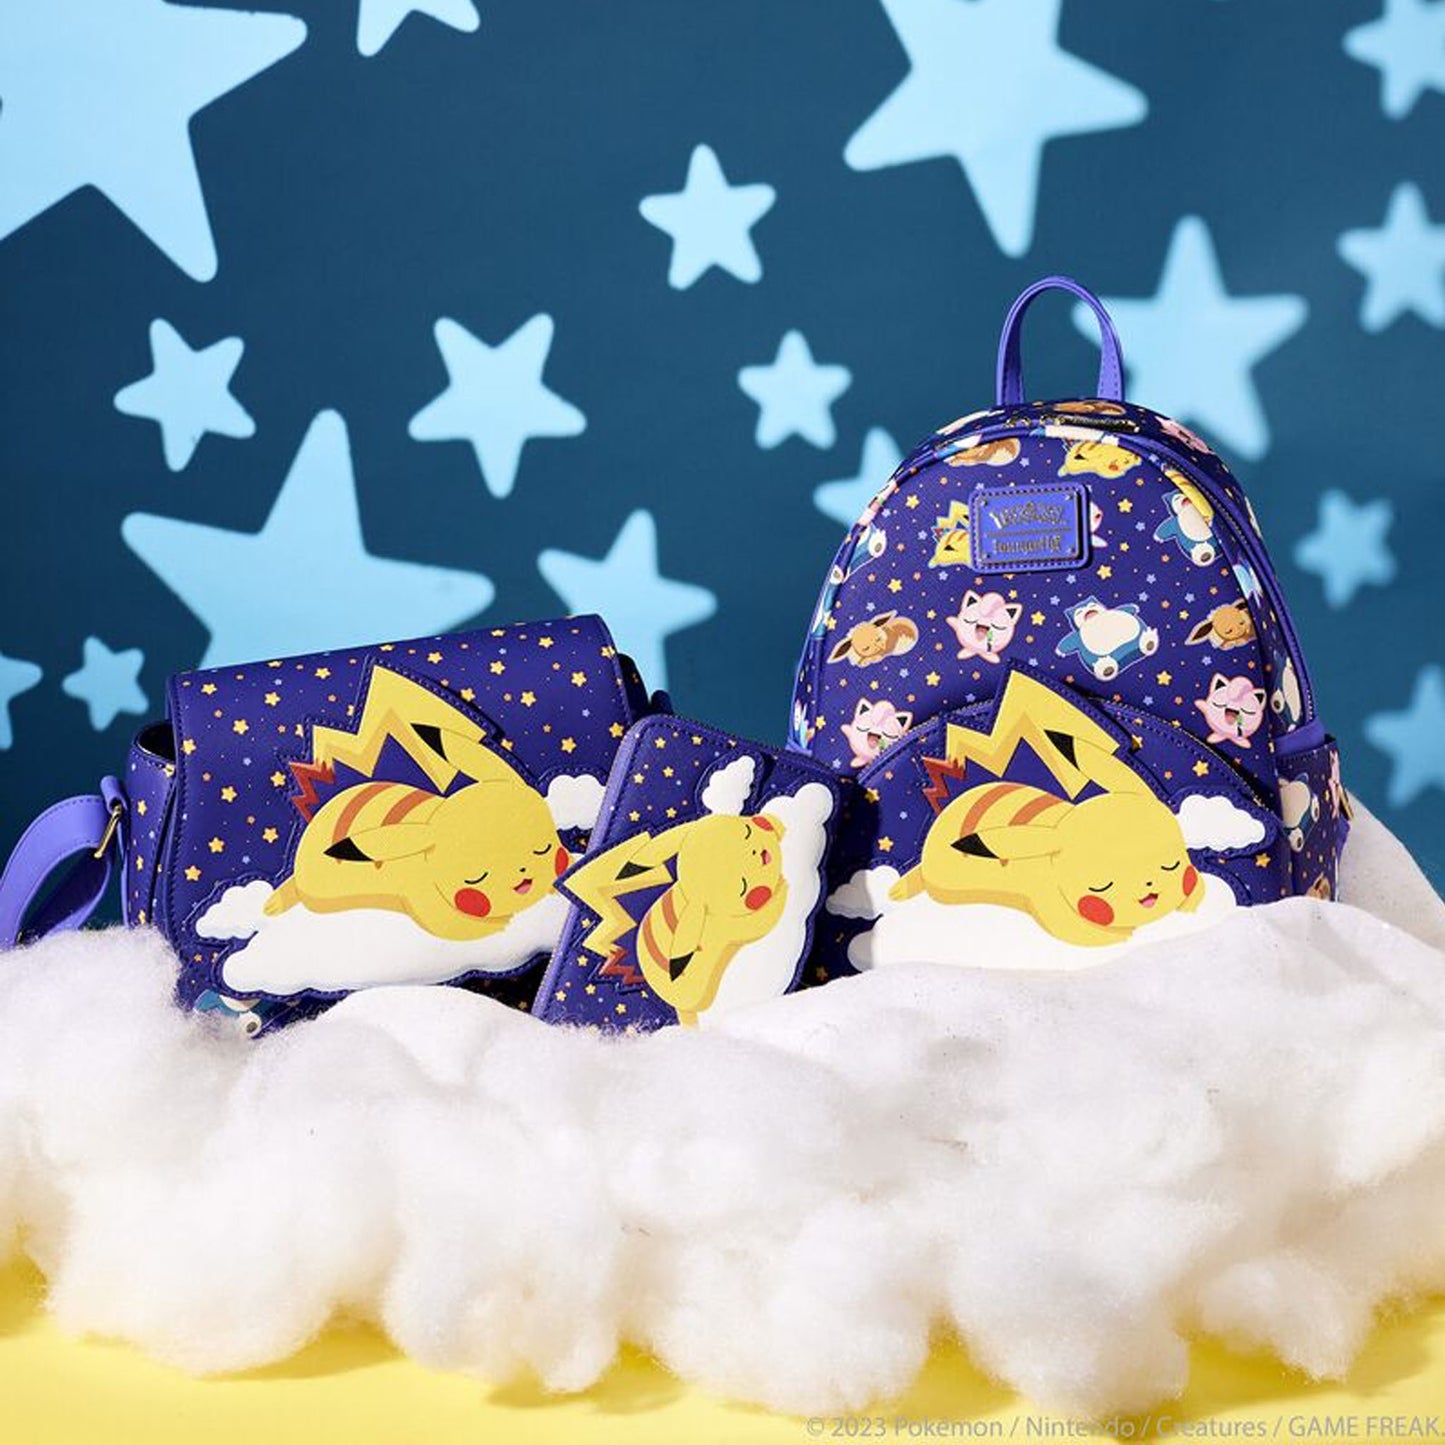 Sleeping Pikachu and Friends (Pokemon) Mini Backpack by Loungefly